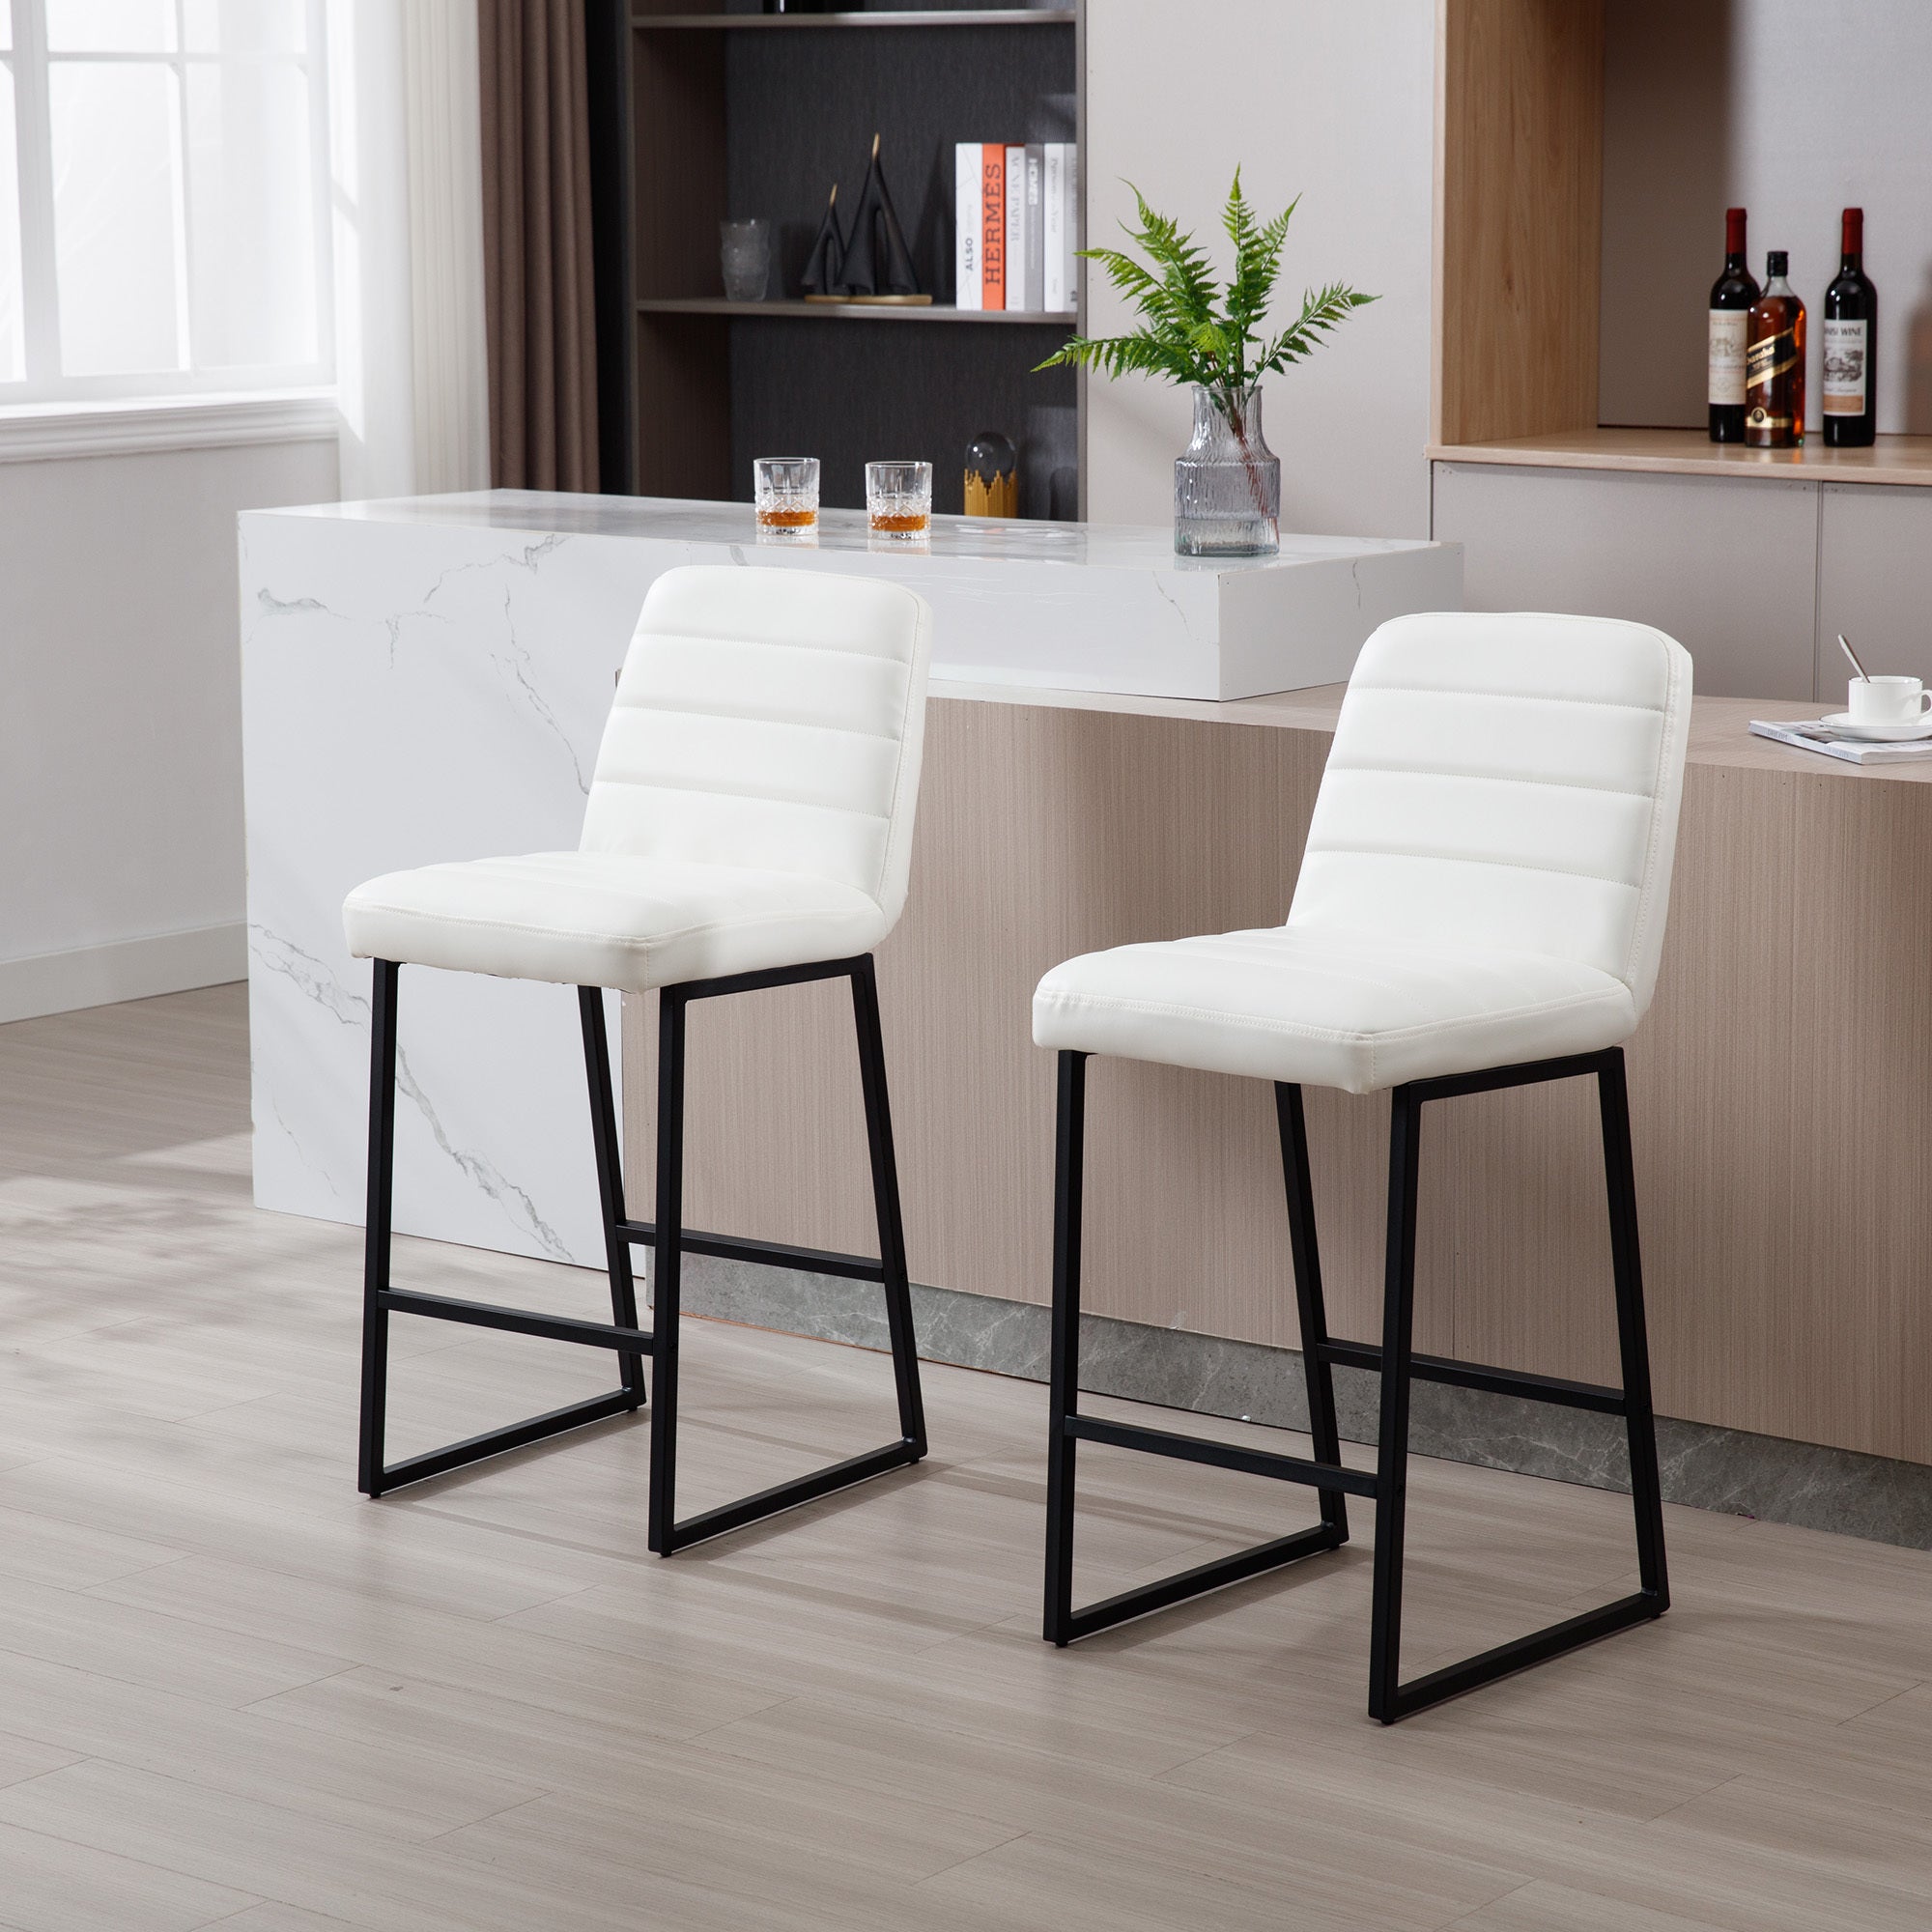 Low Bar Stools Set of 2 Bar Chairs for Living Room cream-kitchen-foam-dry clean-modern-bar